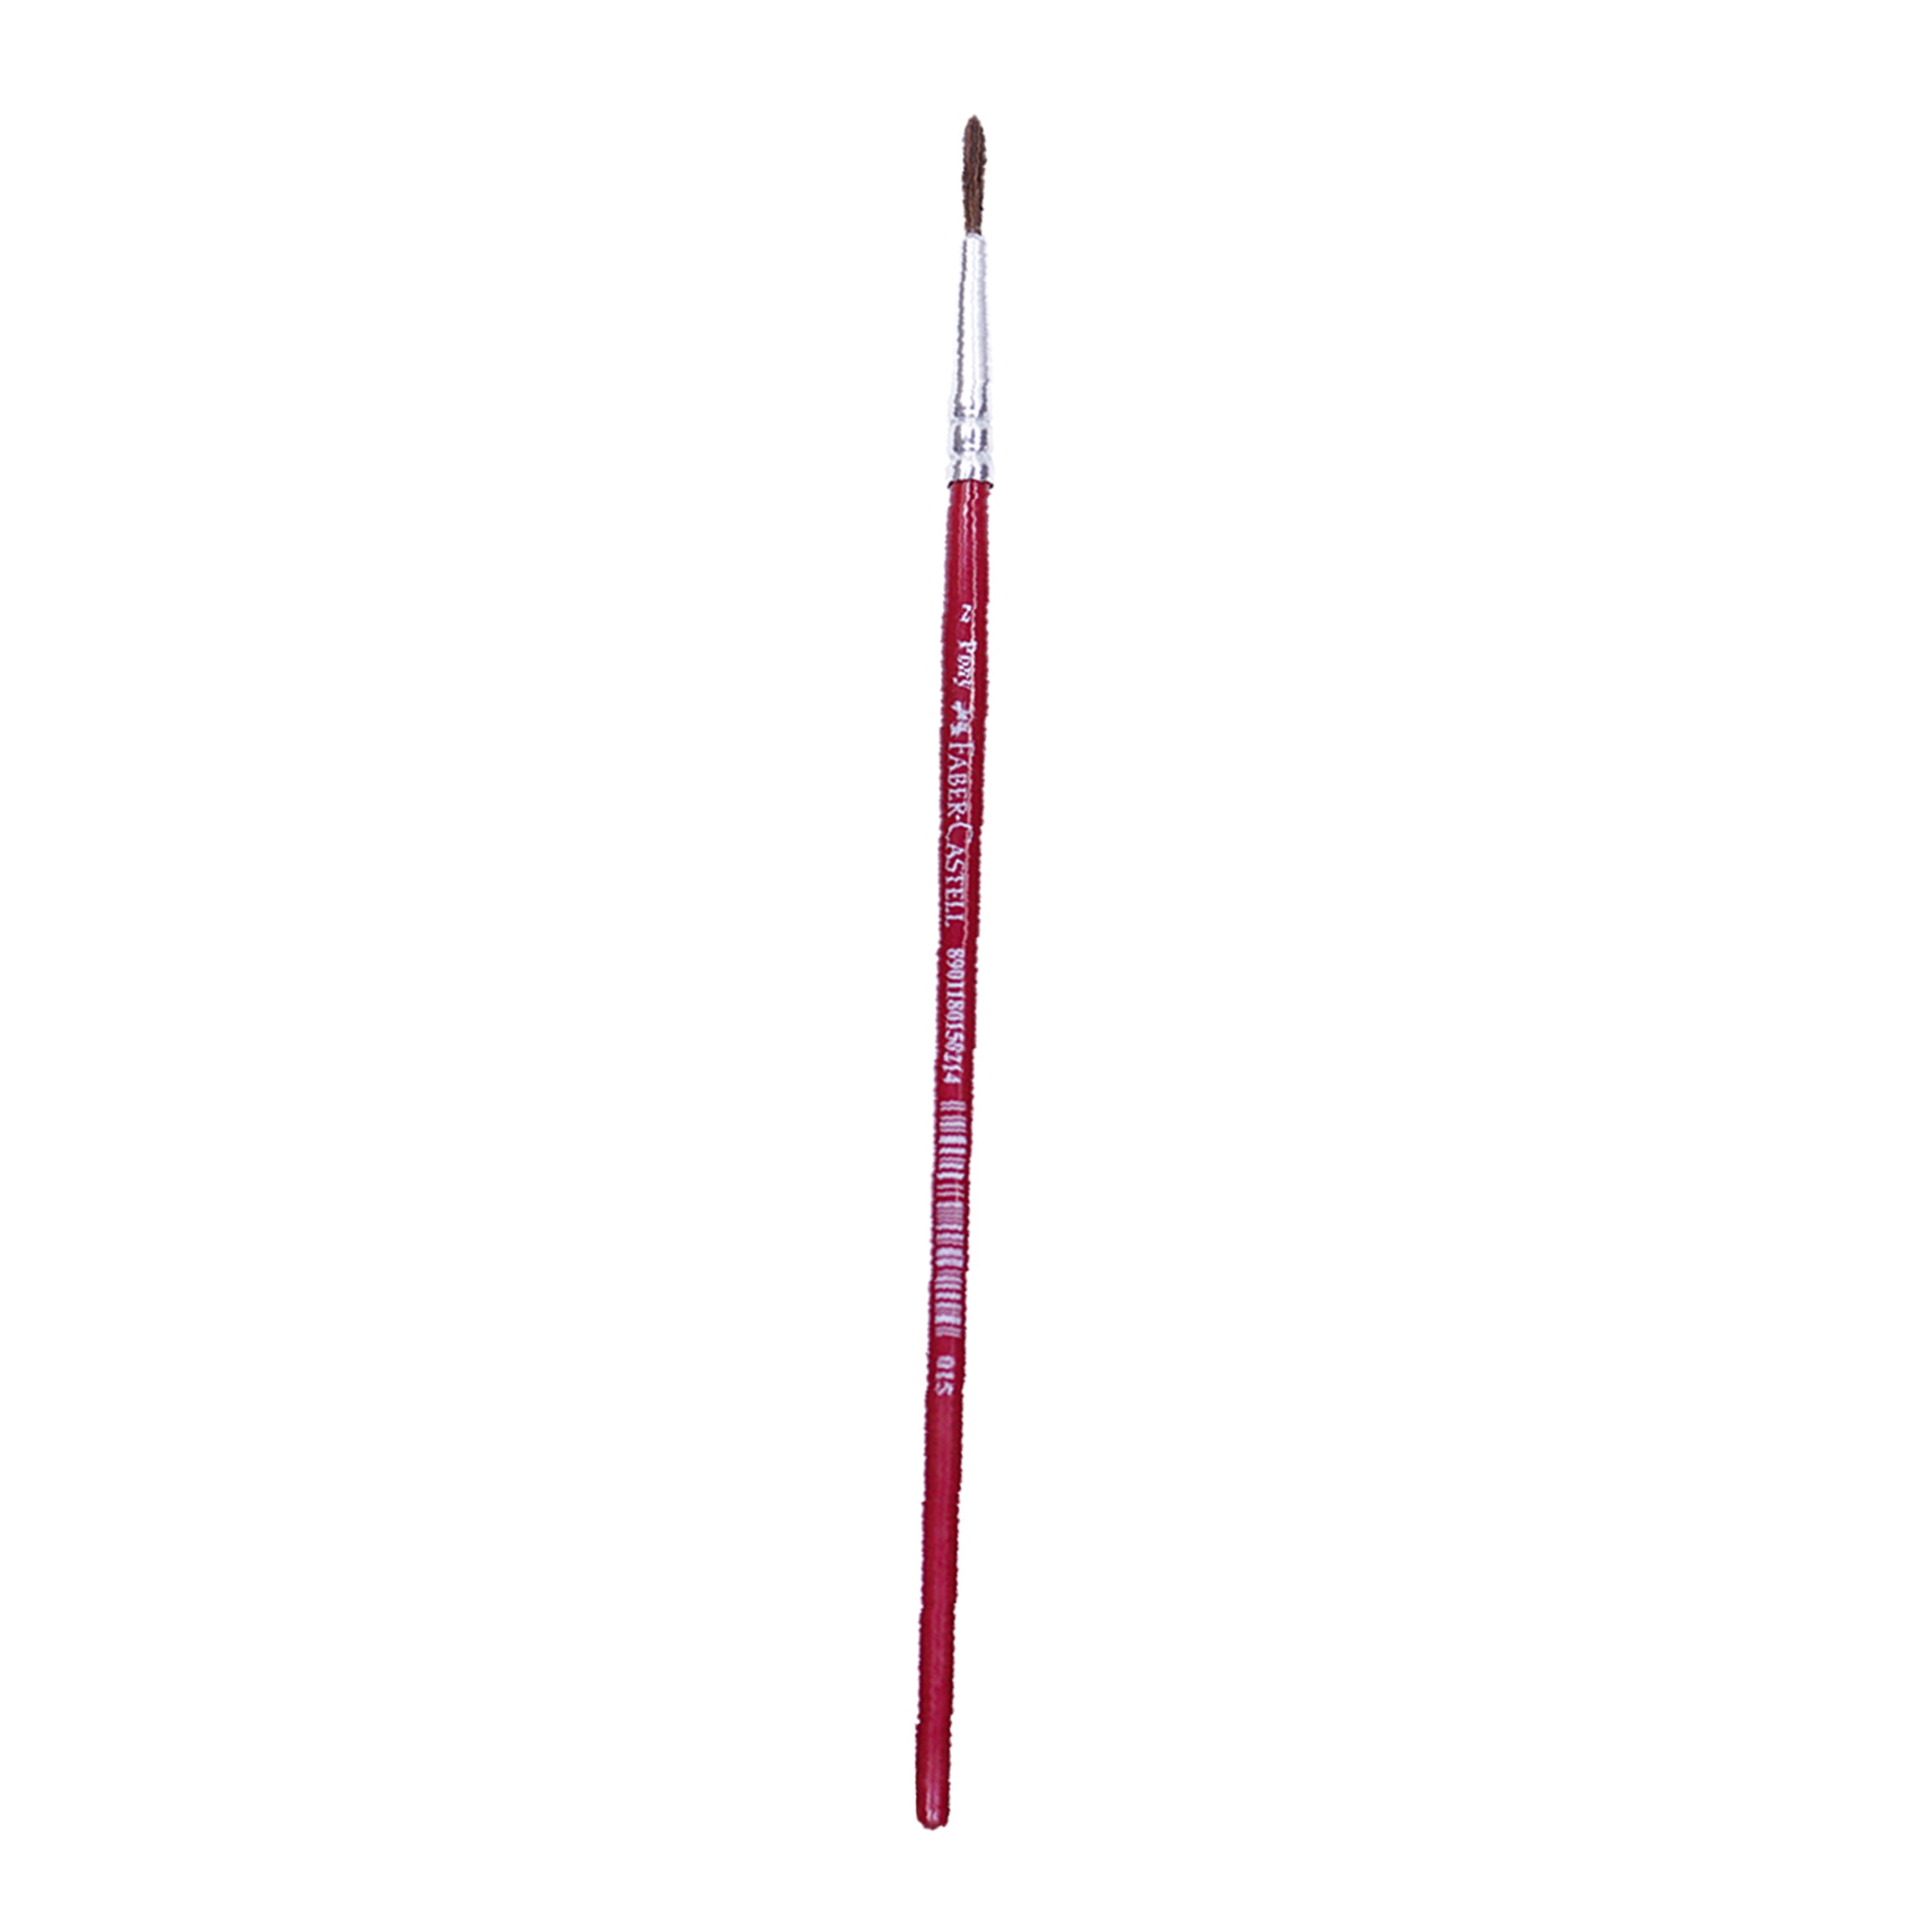 Faber Castell Paint Brush - Pony Hair Round Size 2, 1pc